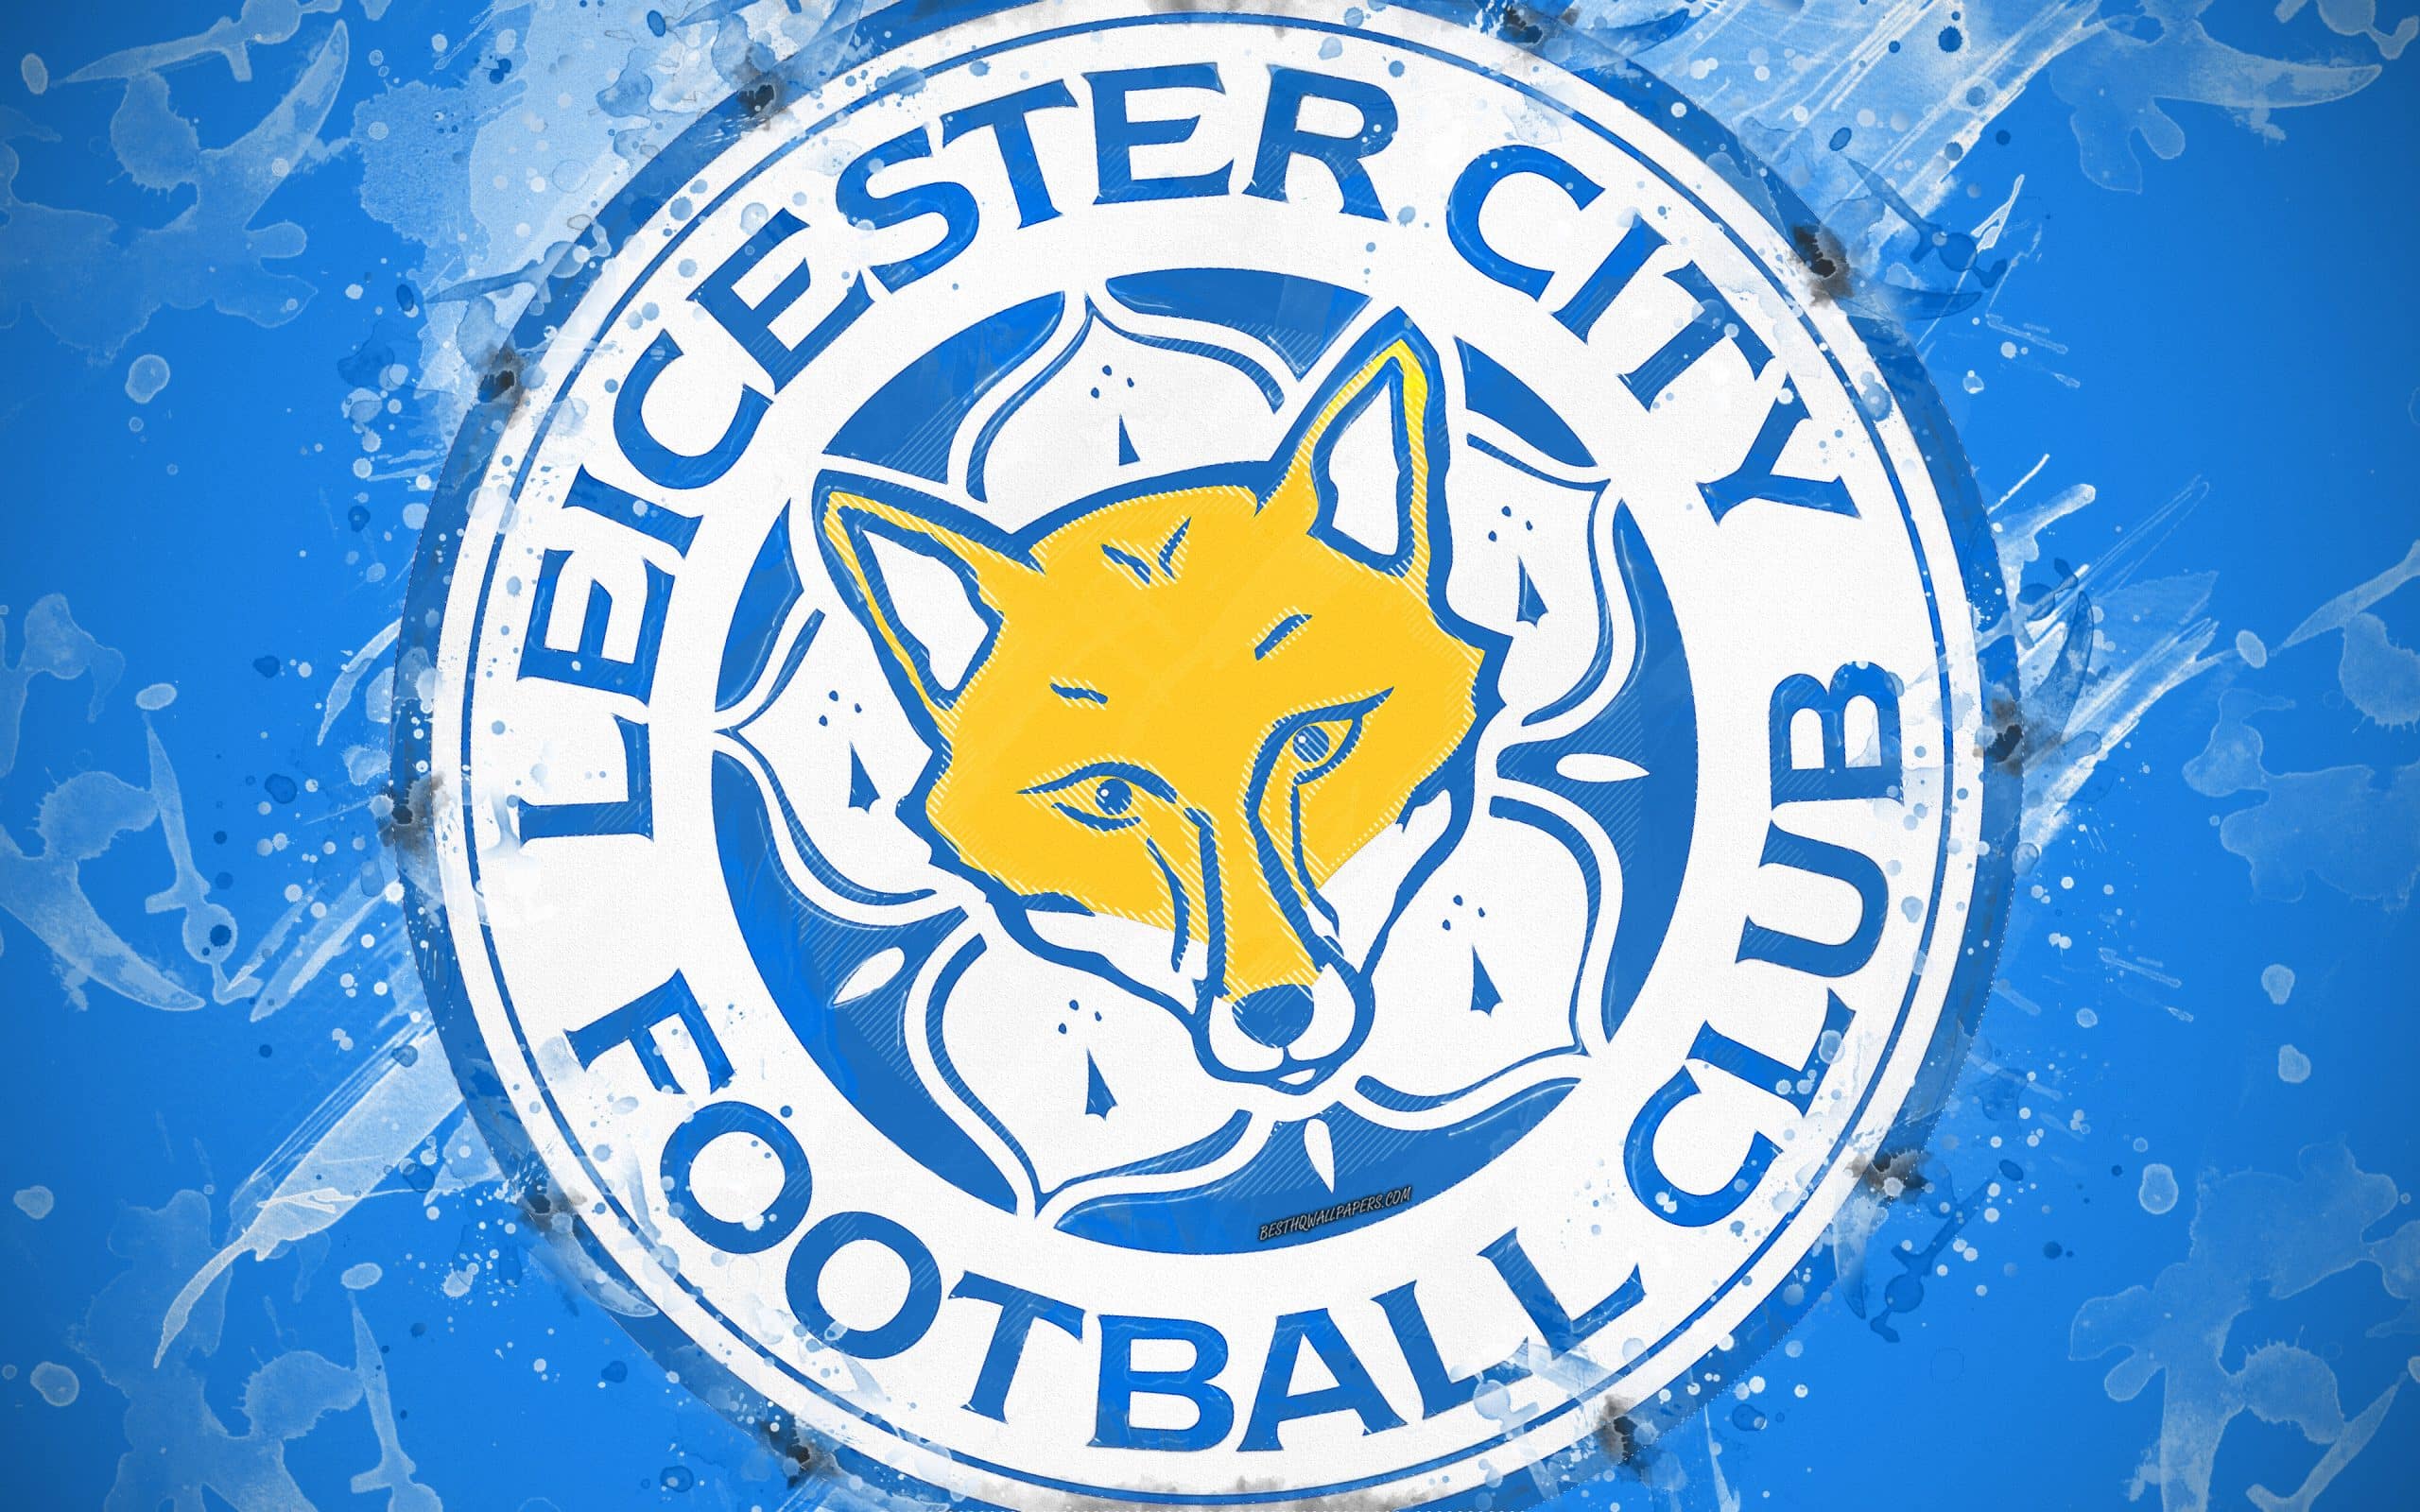 Leicester Fc